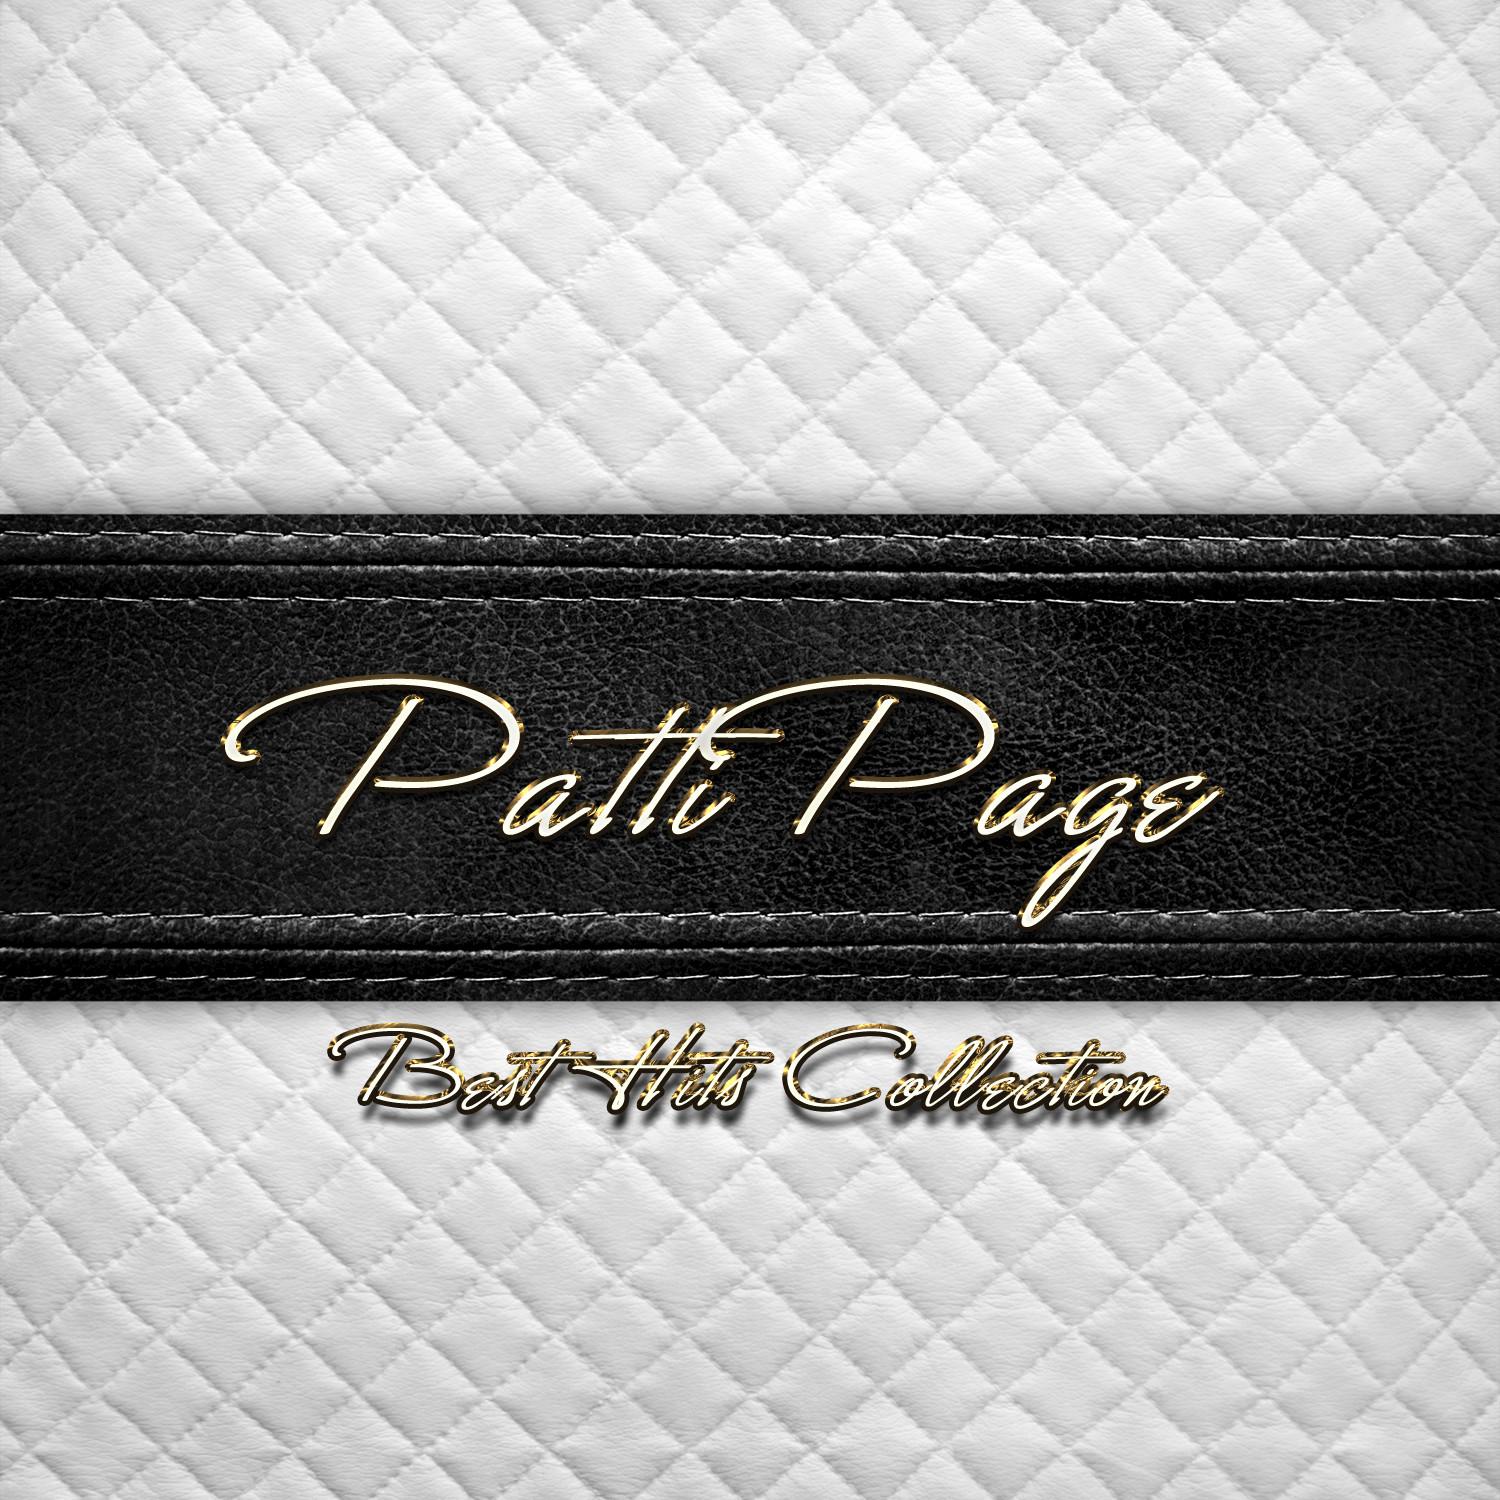 Best Hits Collection of Patti Page